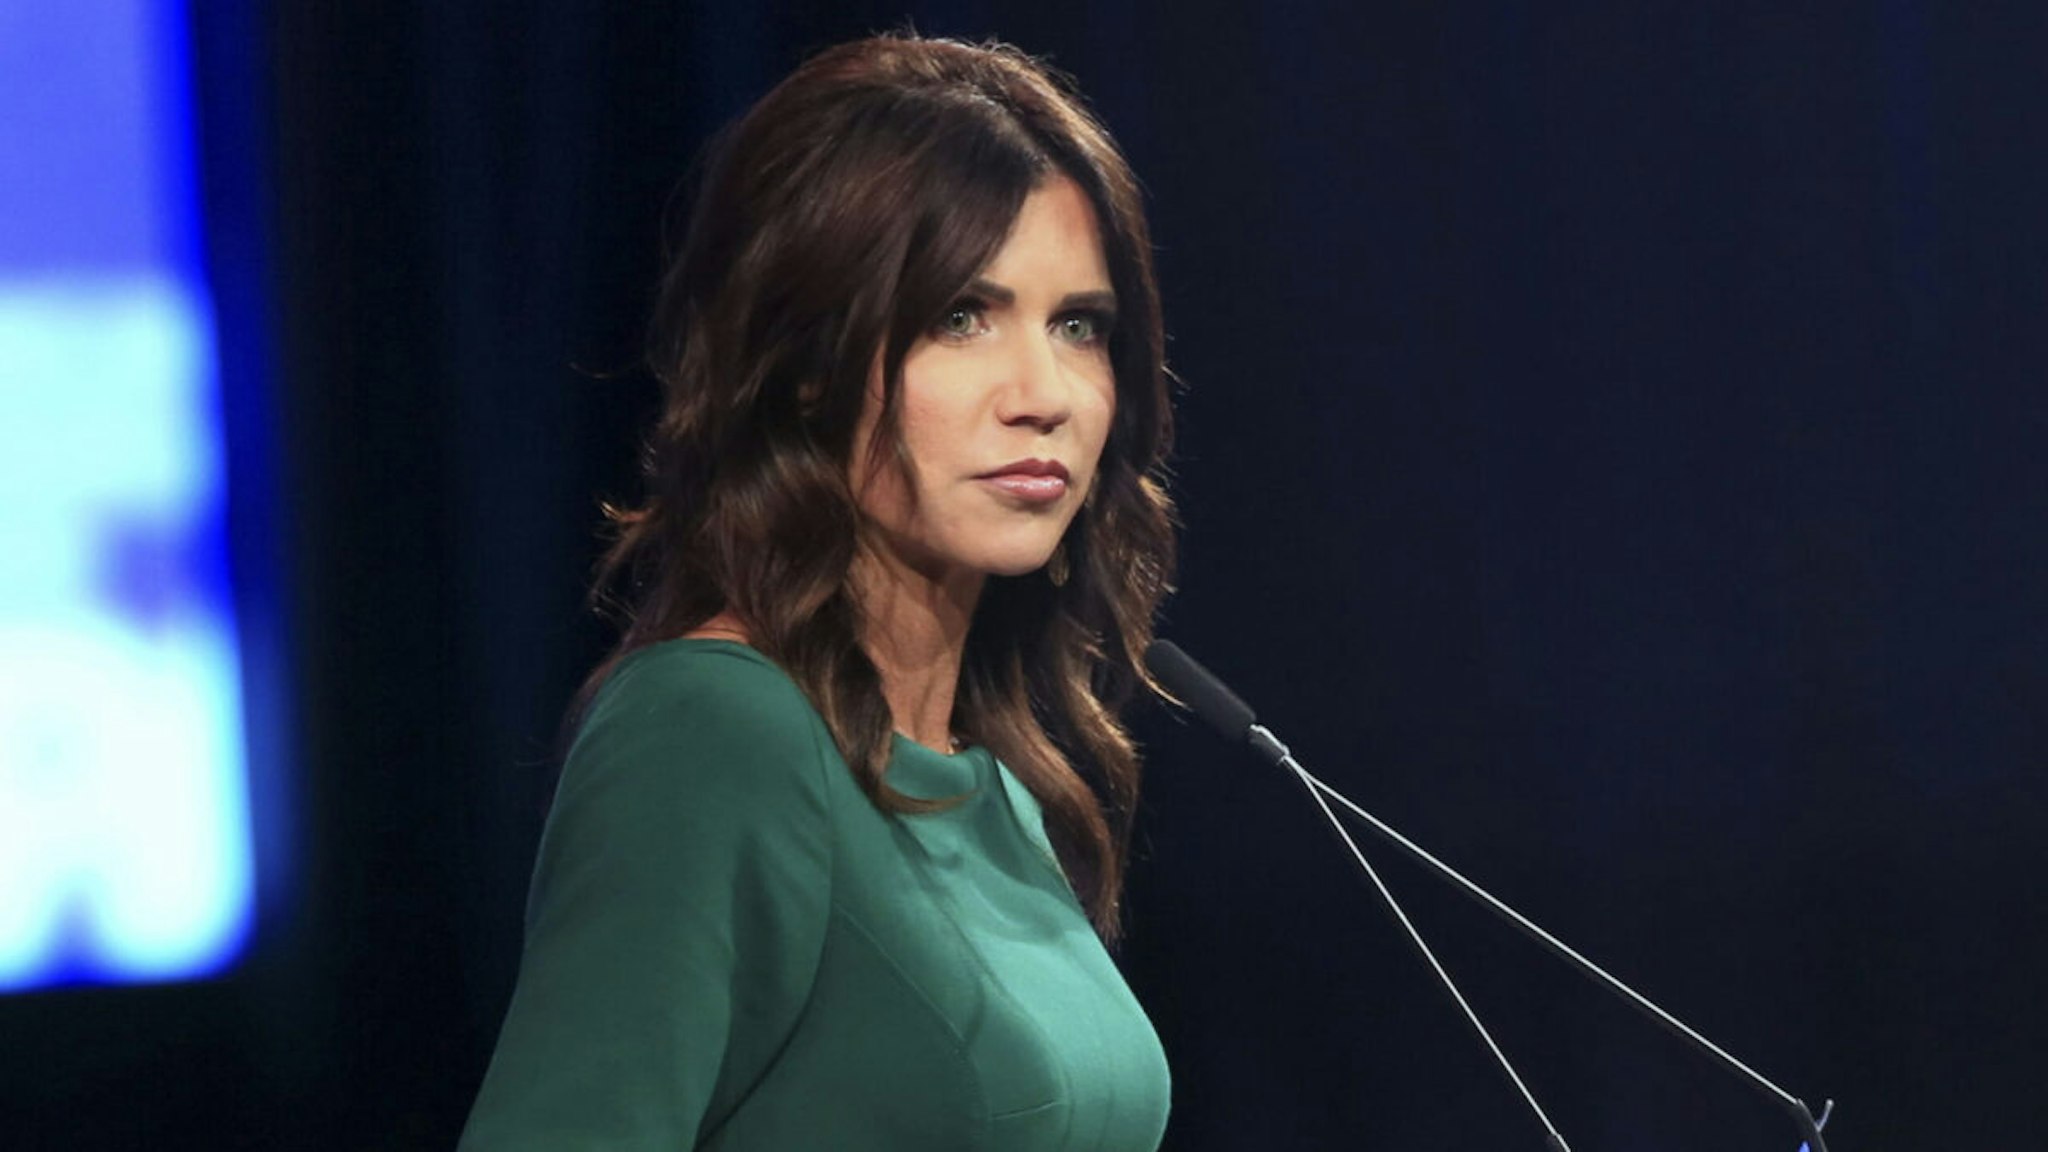 Kristi Noem, governor of South Dakota, pauses while speaking during the Conservative Political Action Conference (CPAC) in Dallas, Texas, U.S., on Sunday, July 11, 2021.